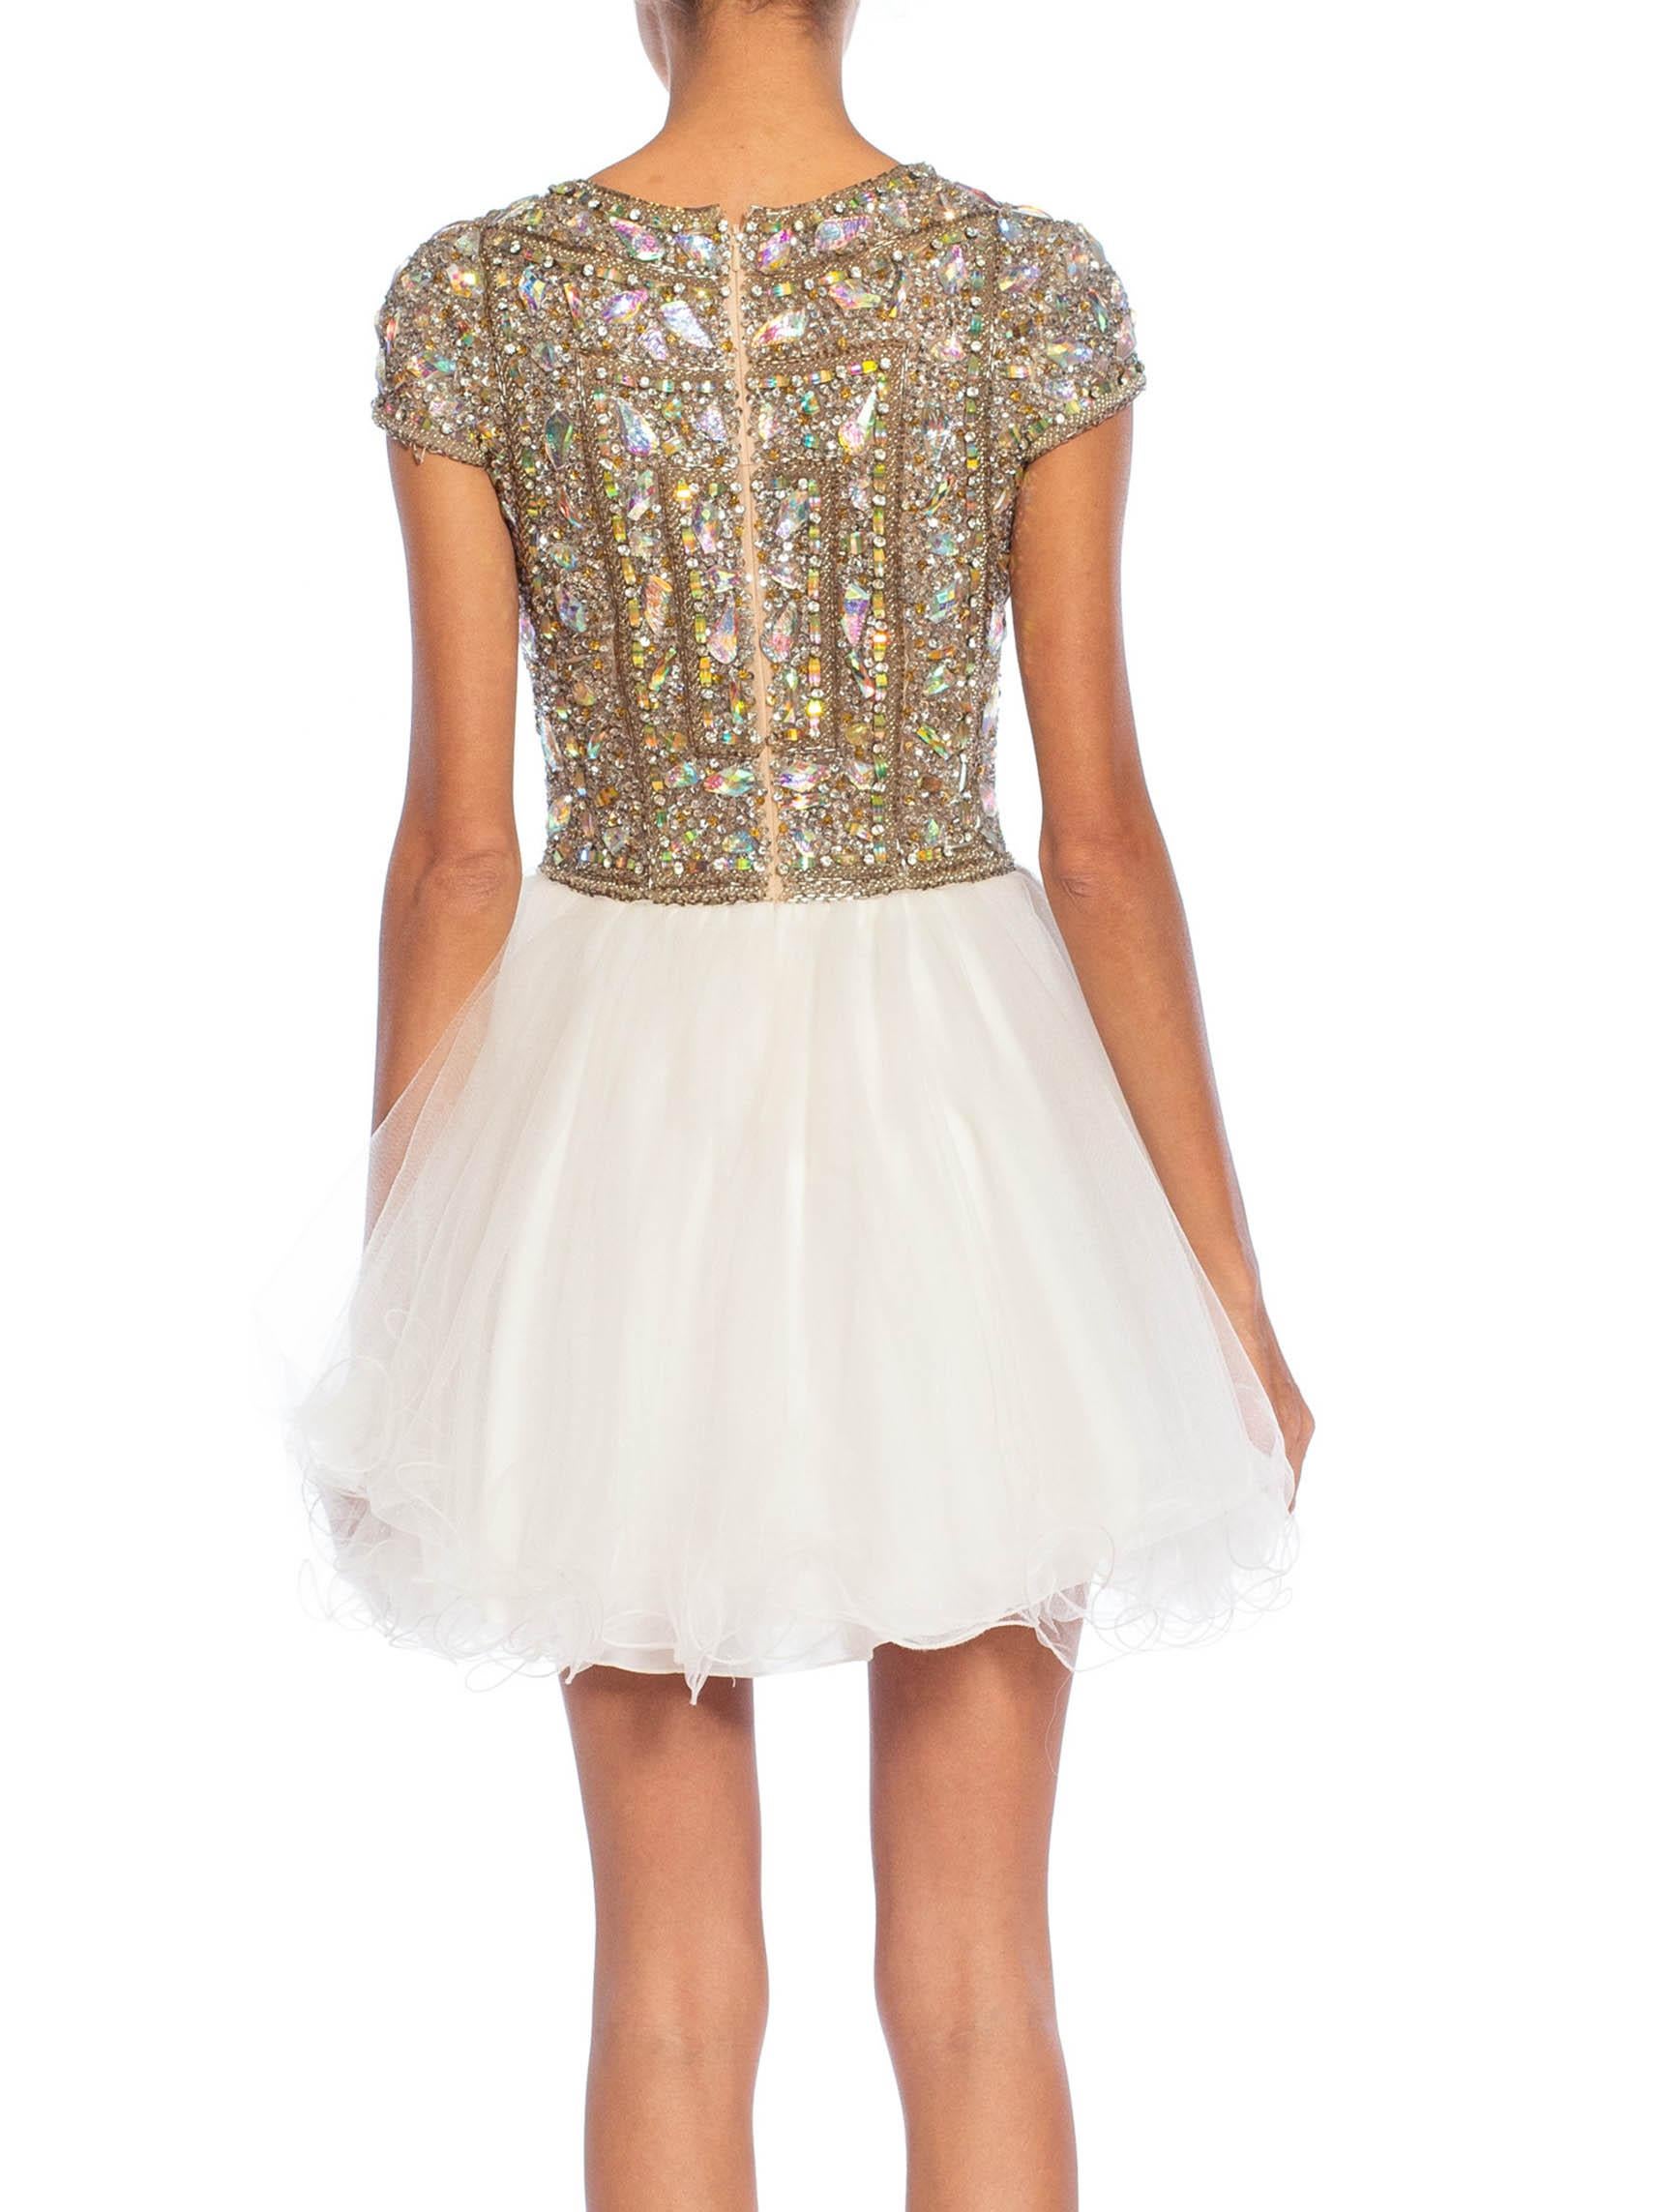 2010S Silver & White Beaded Tulle Cocktail Dress For Sale 4